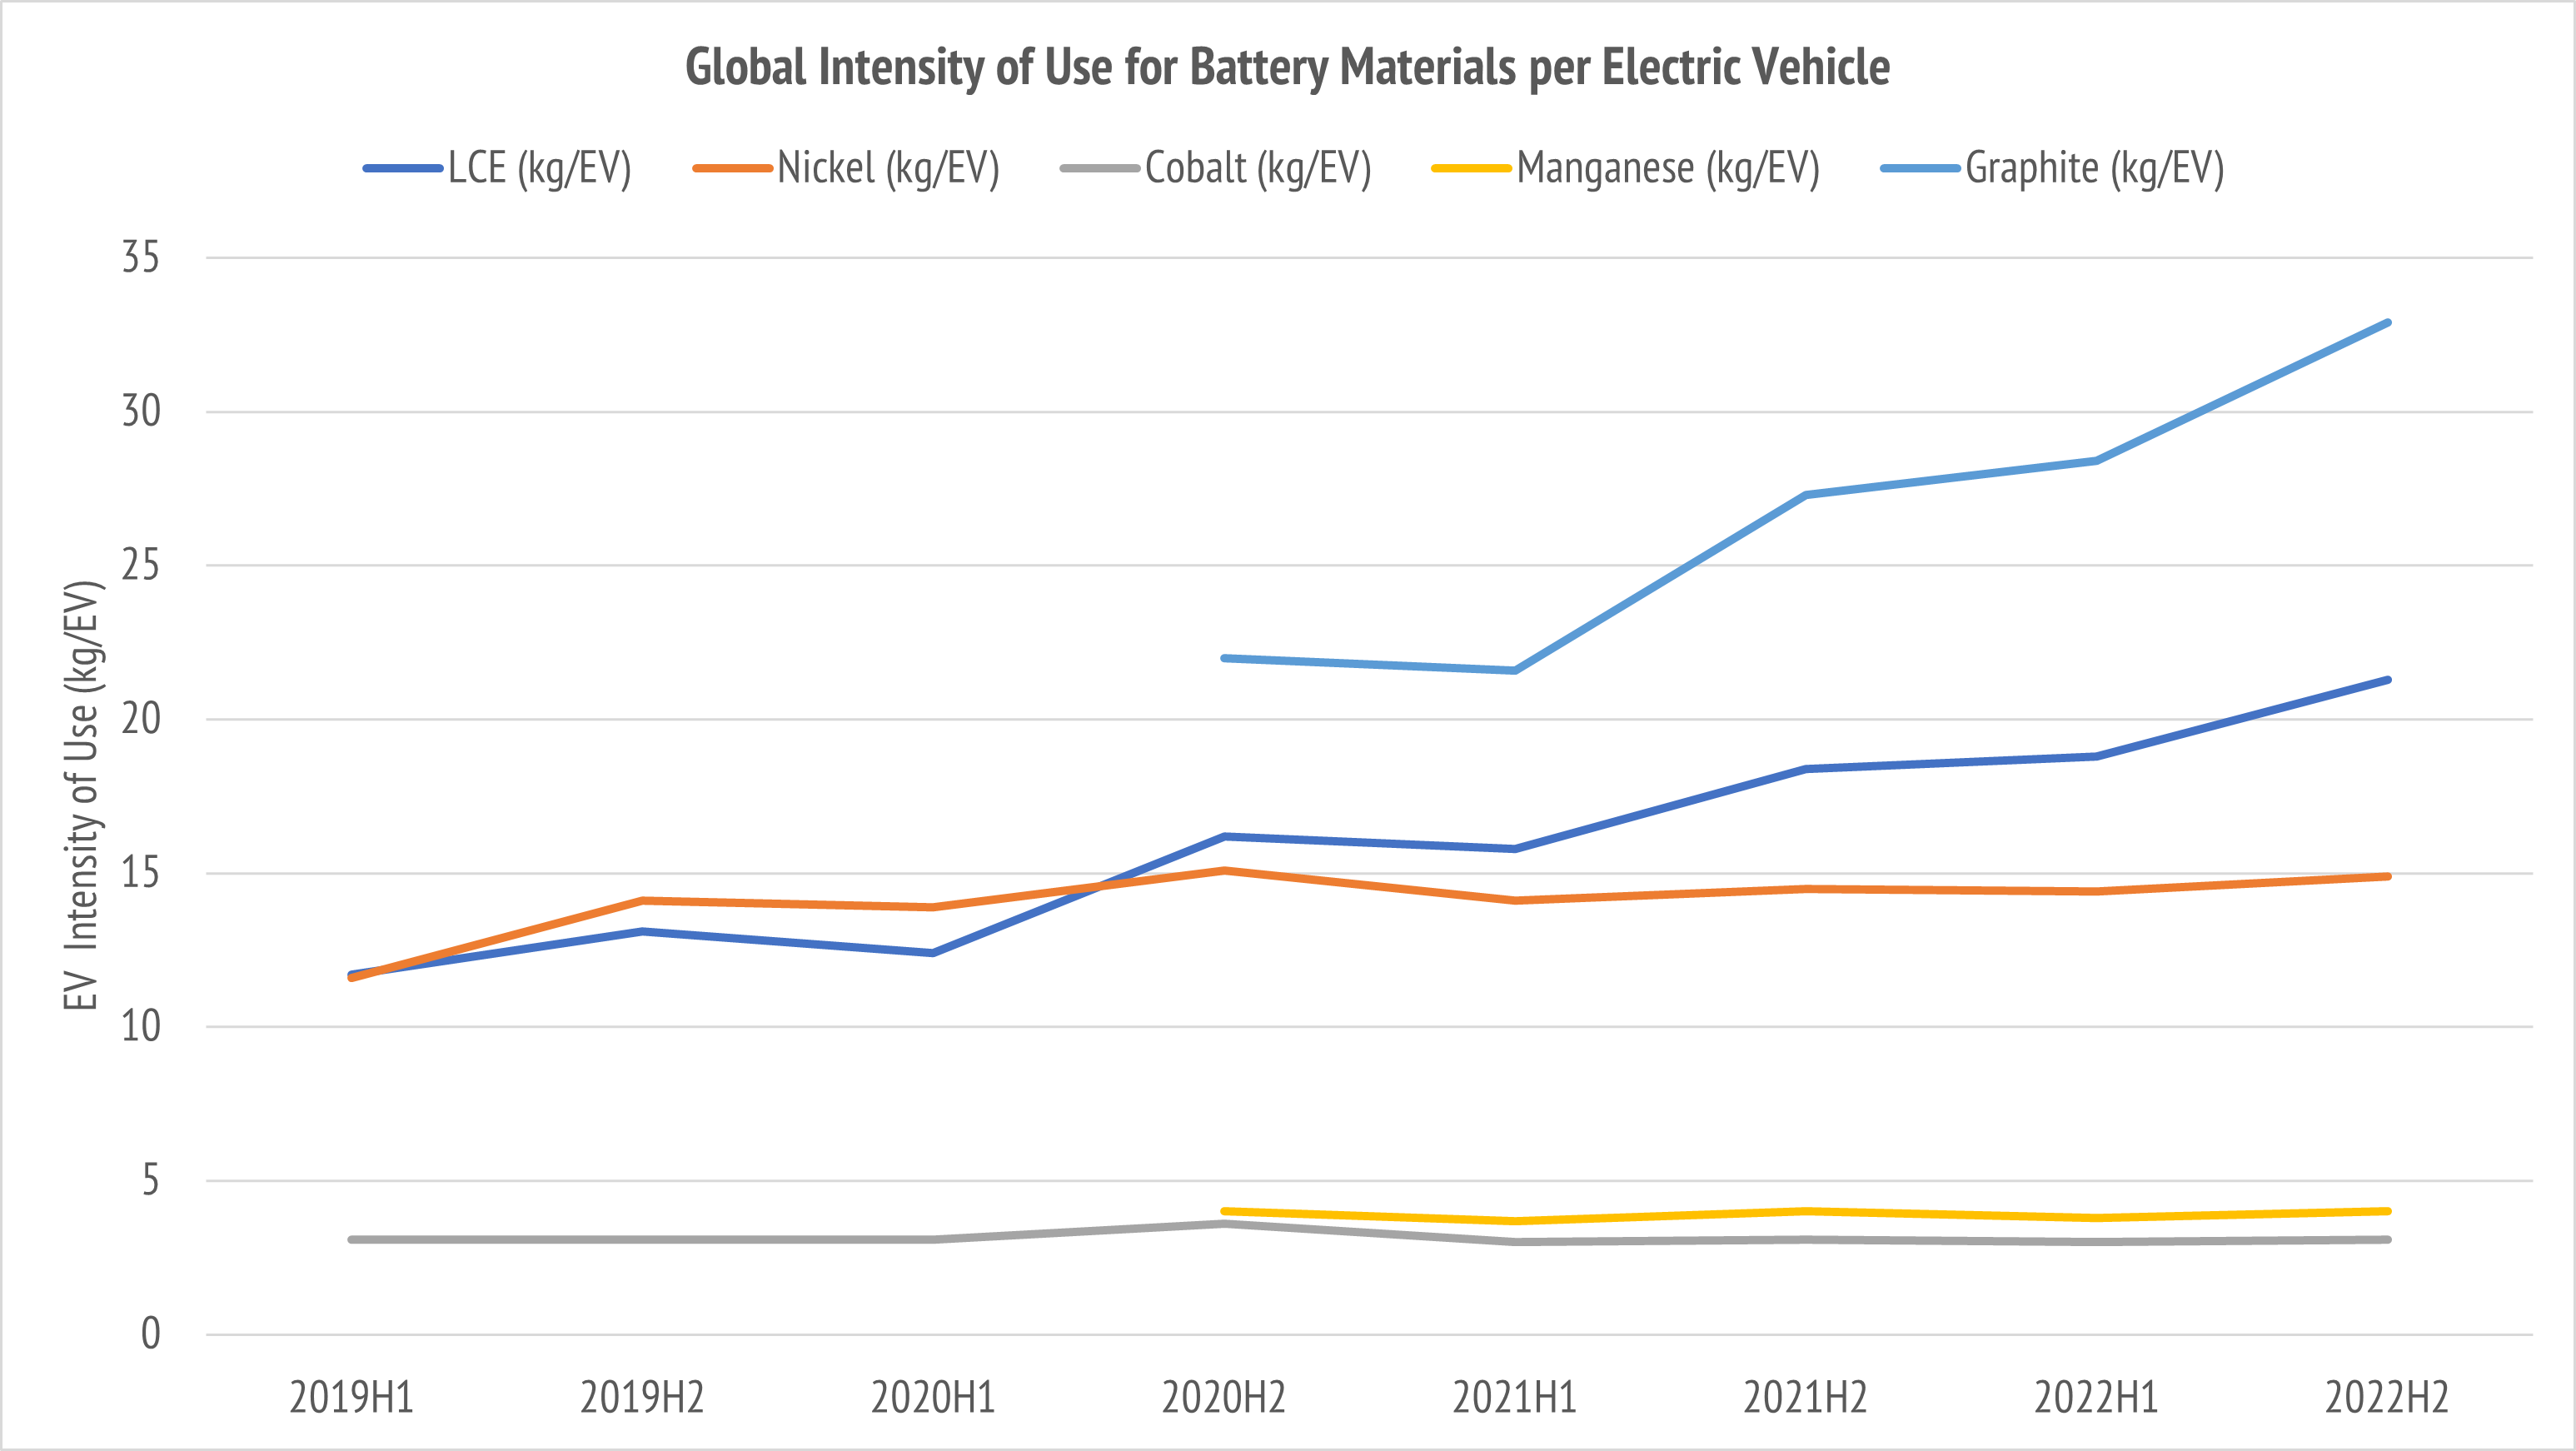 Global EV Intensity of Use. Source: Adamas Intelligence State of Charge report (2020-2023).